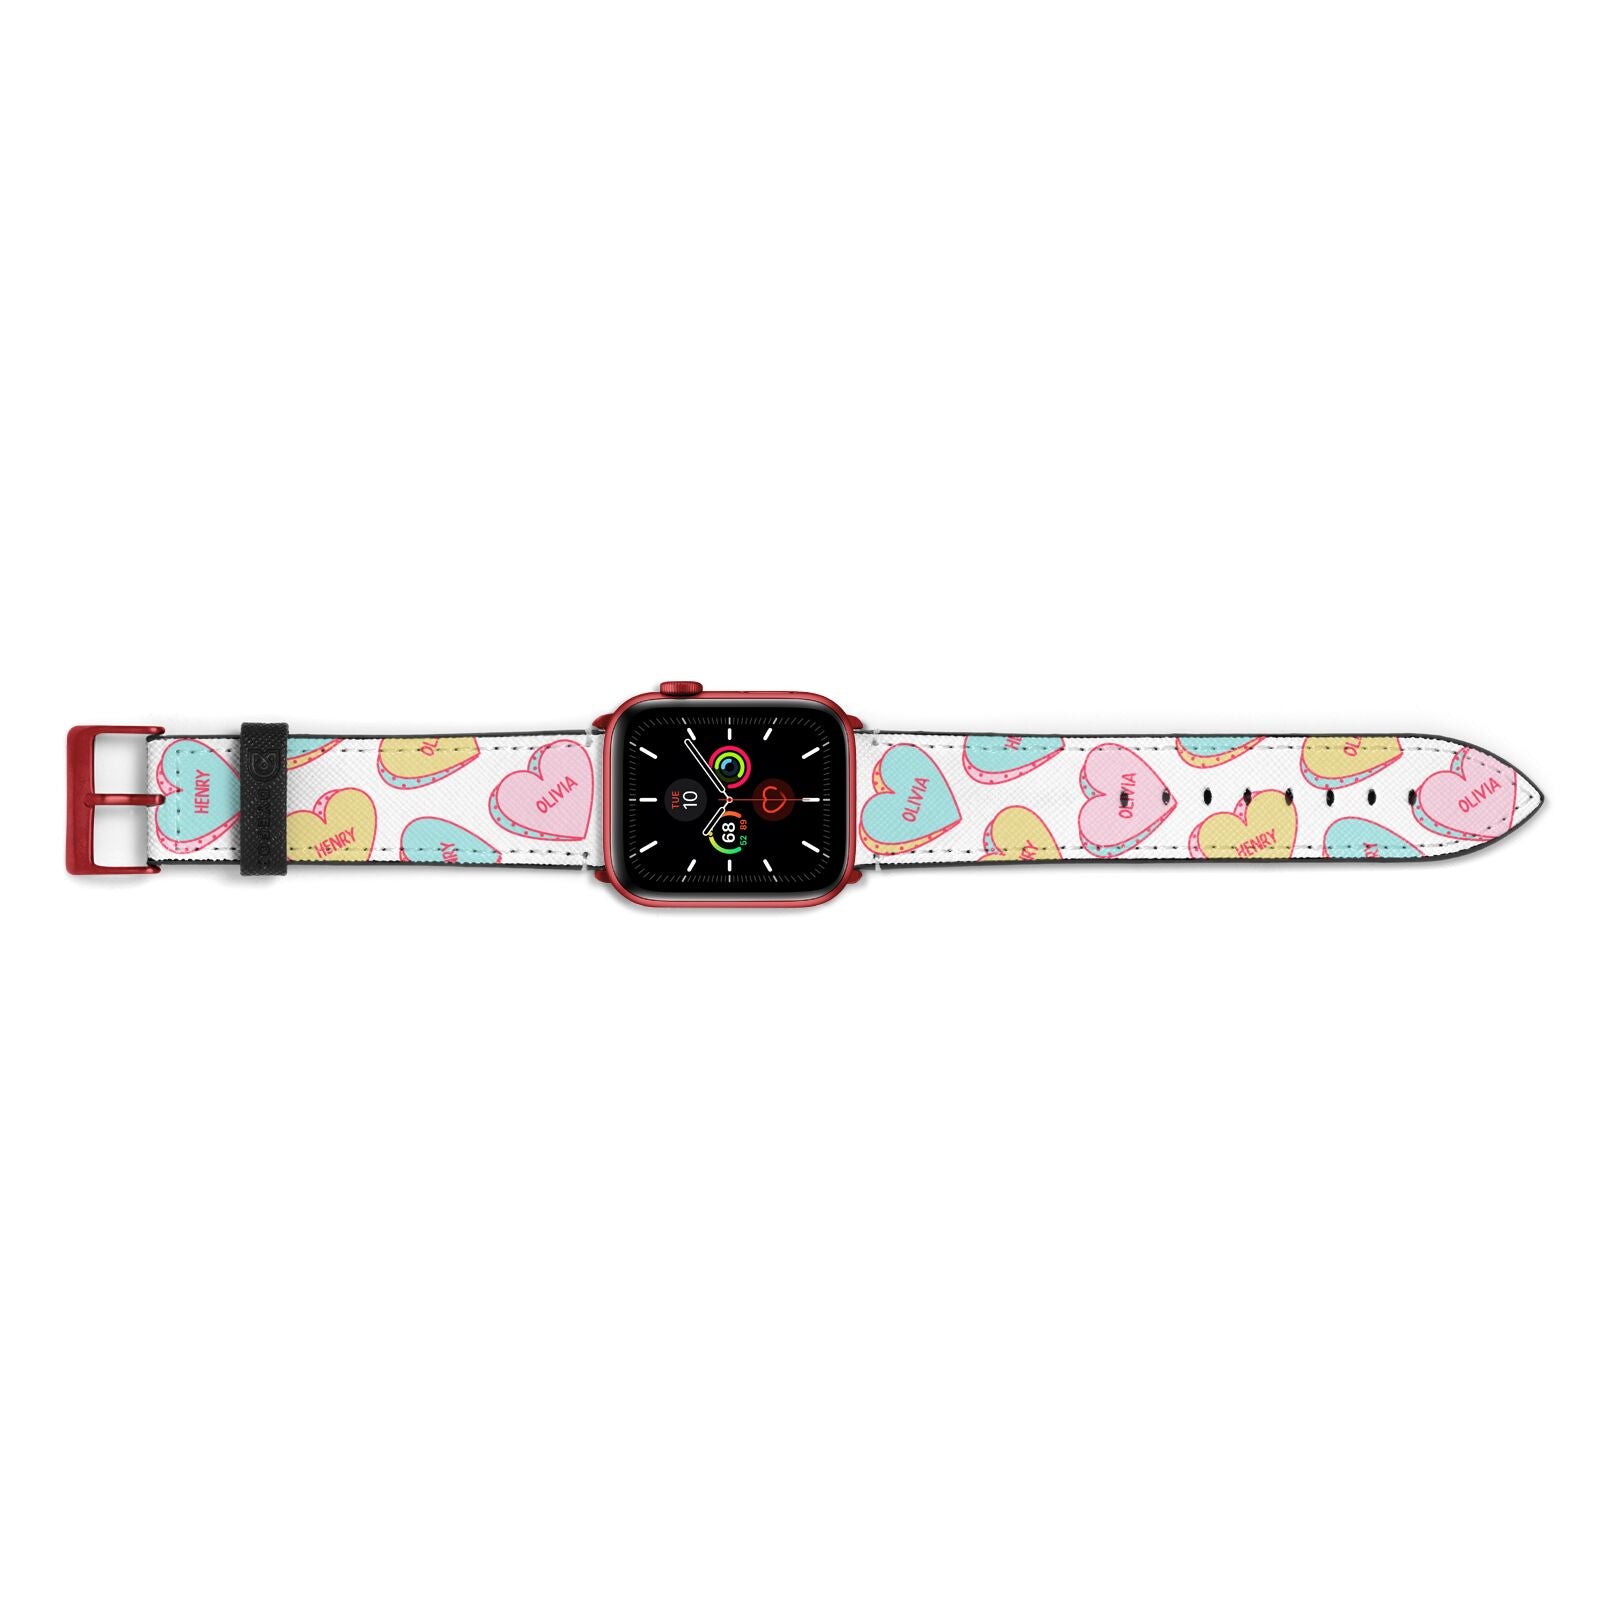 Personalised Heart Sweets Apple Watch Strap Landscape Image Red Hardware